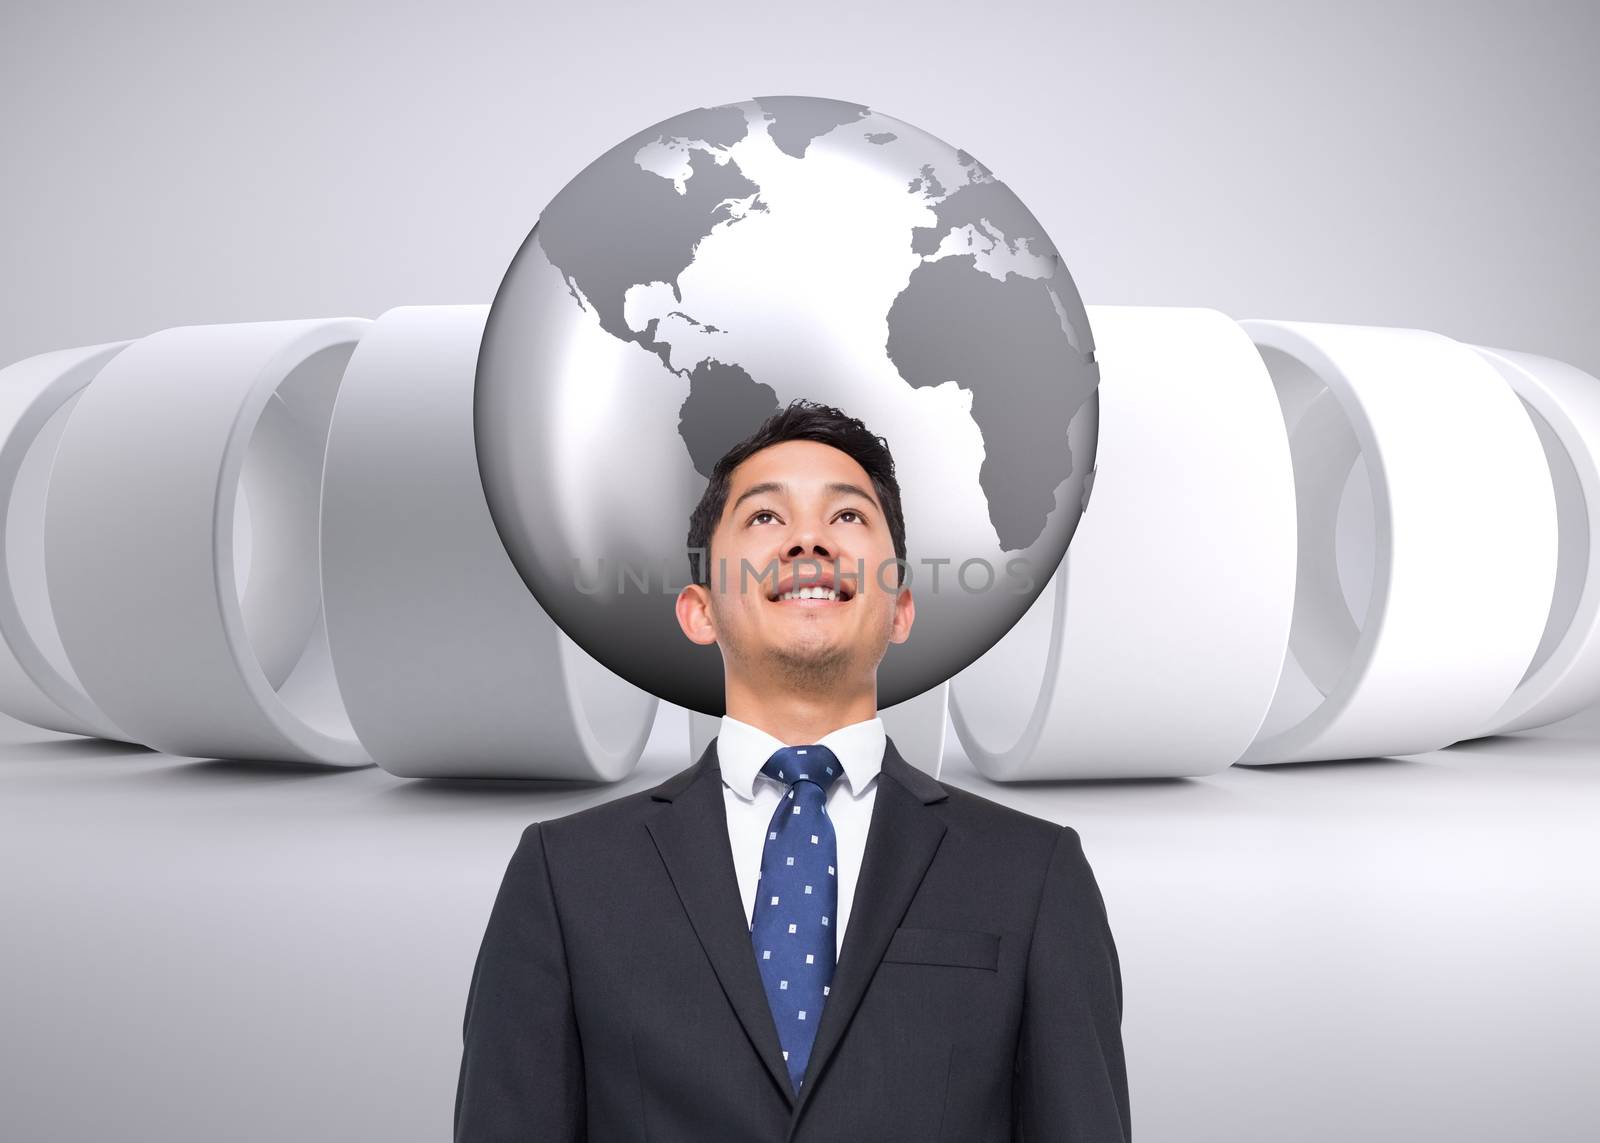 Composite image of businessman against planet on grey abstract background